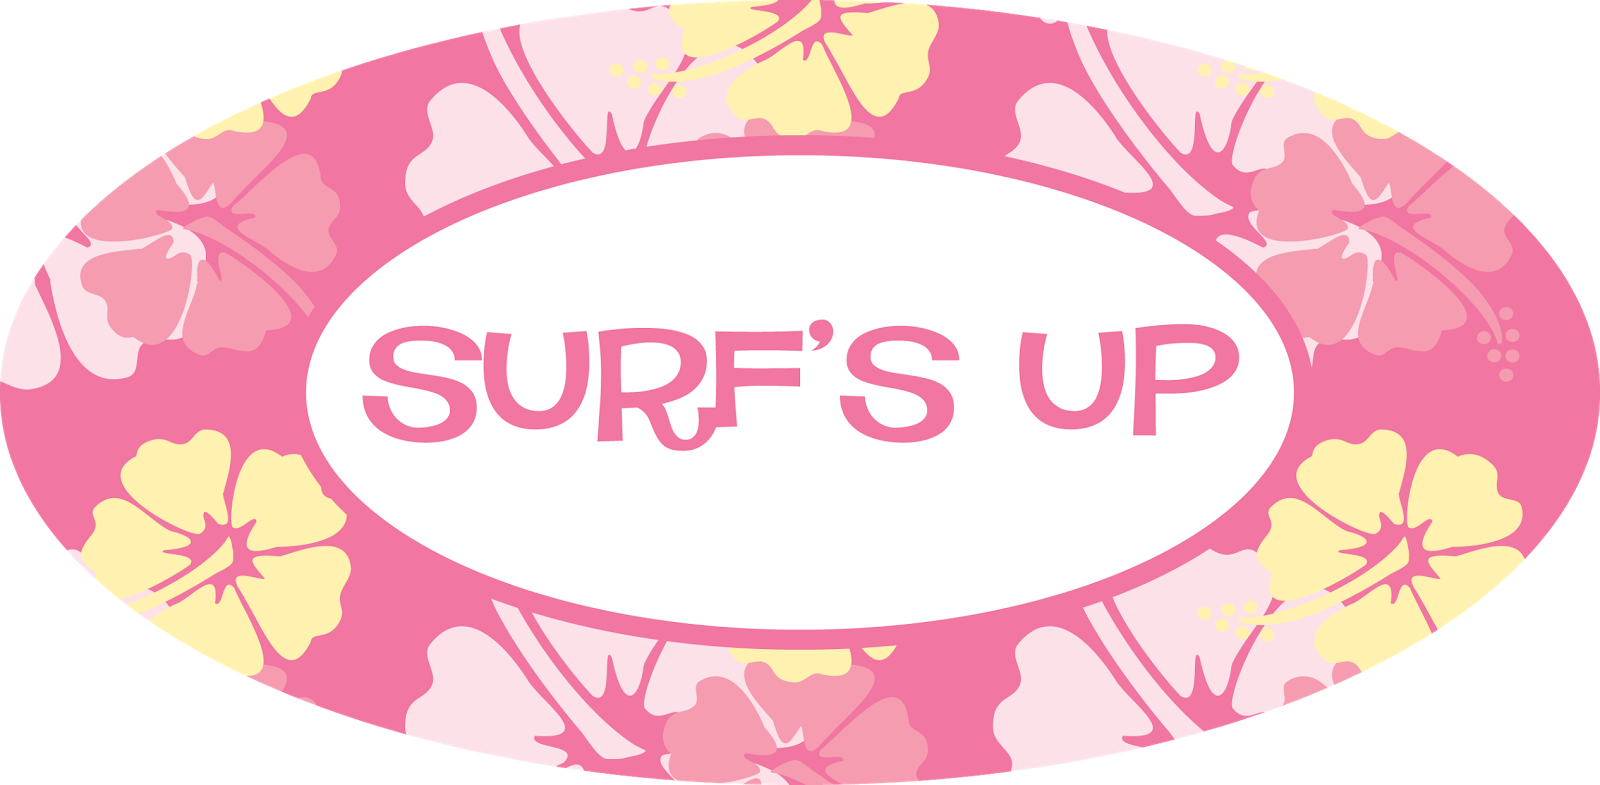 surfing clipart pink